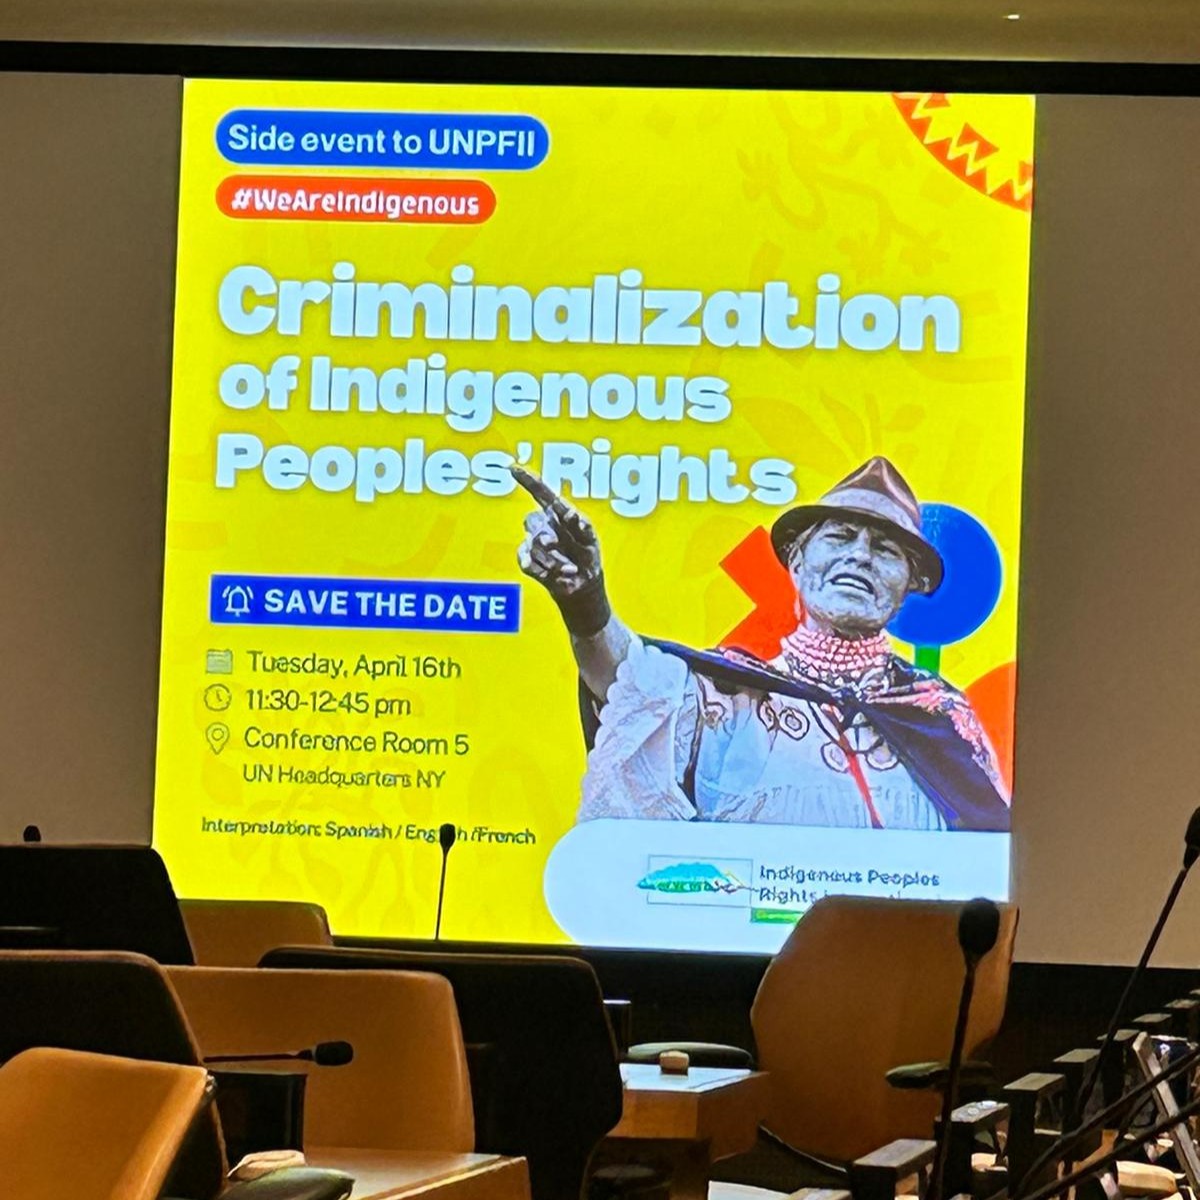 Our delegates at #UNPFII attended a @UN side event today – Criminalization of Indigenous Peoples’ Rights. In a world where Indigenous women face discrimination, violence, and sexism, we must all work together to find solutions.